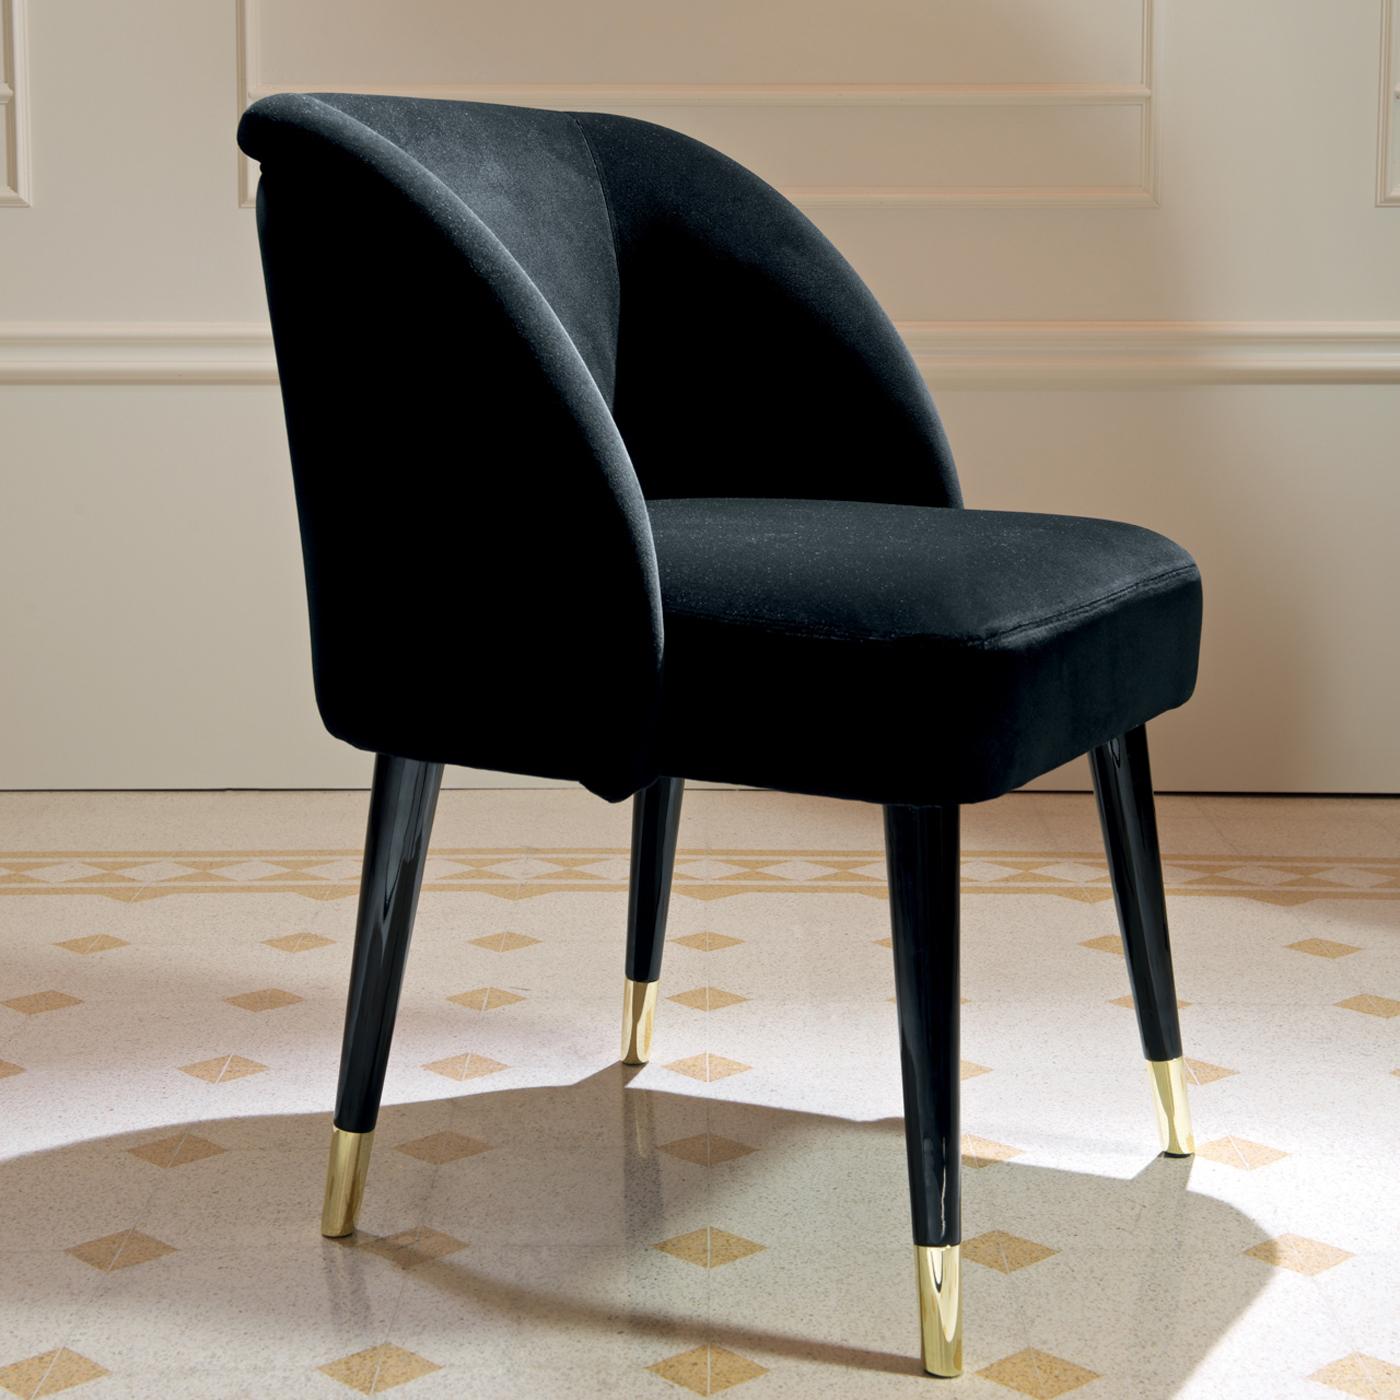 Part of the Pauline Collection, this dining armchair abounds in chic details that will enliven both a modern dining room or a living room seating ensemble, especially when paired with other pieces from the same collection. This retro-inspired design